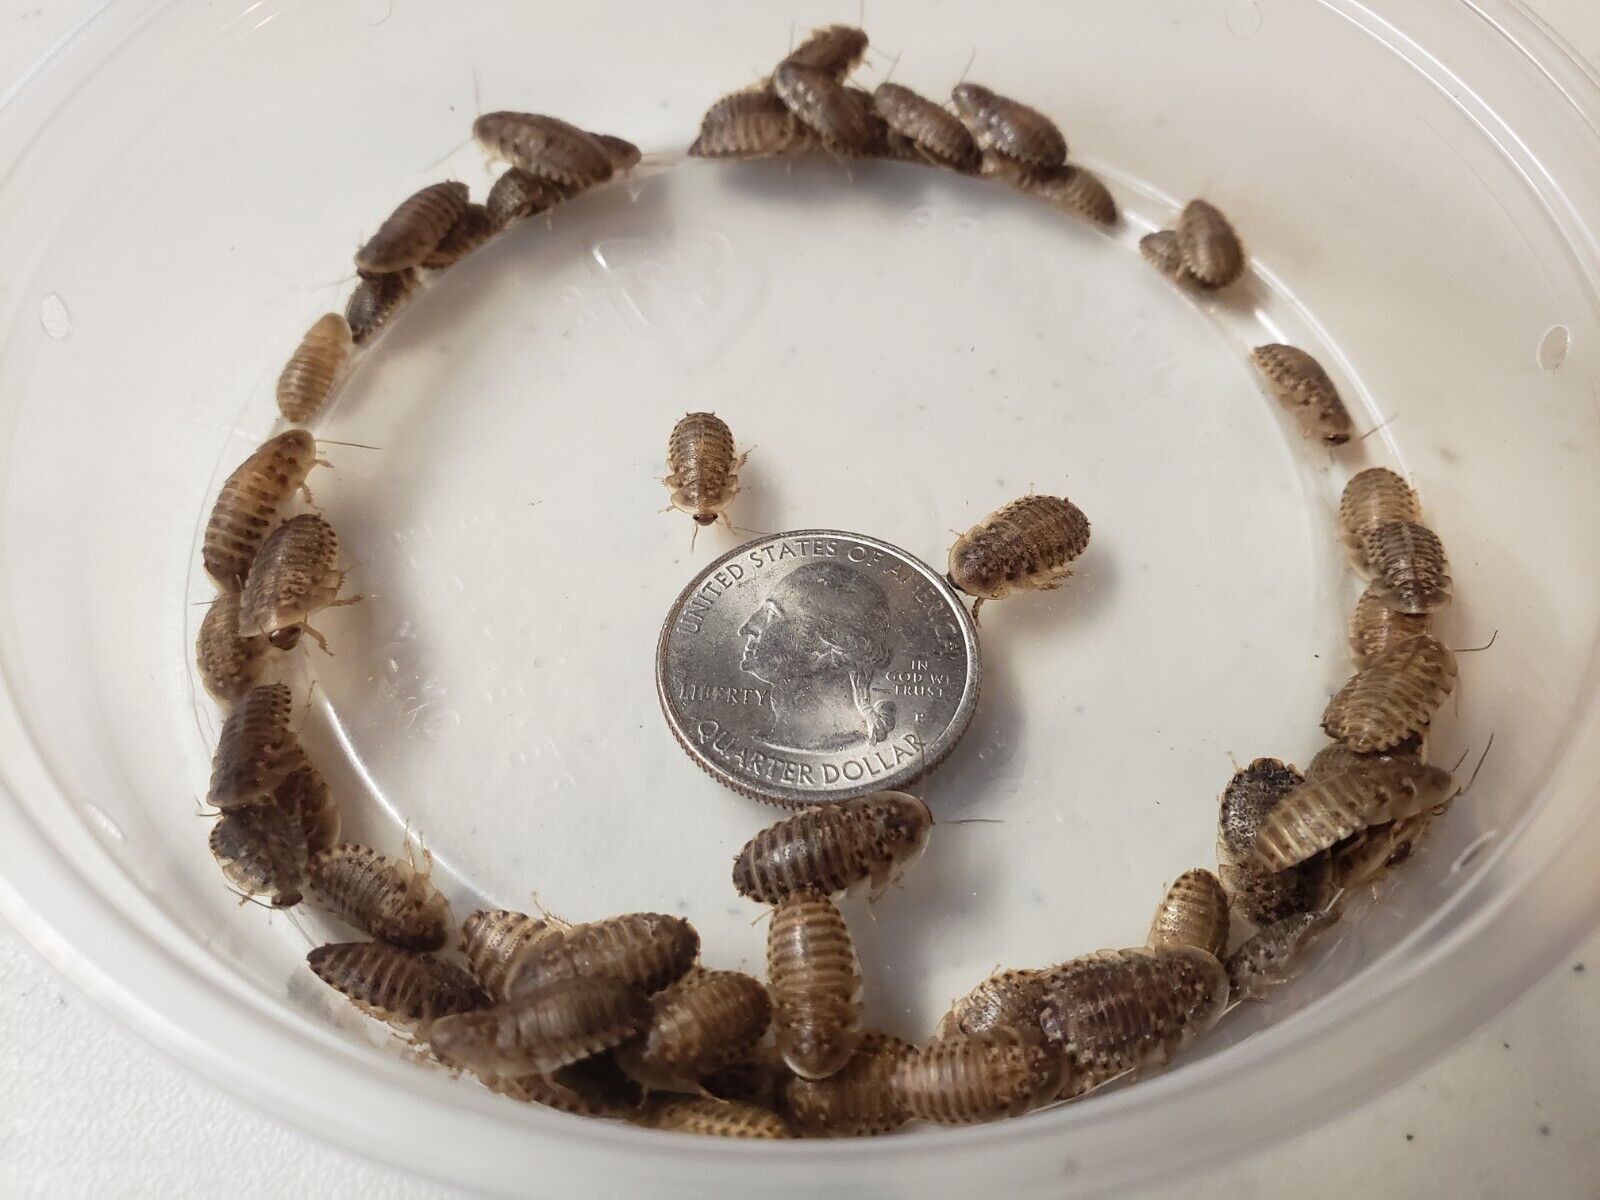 Dubia Roaches Small - Medium - Large Live Reptile Feeders 25 - 1000+